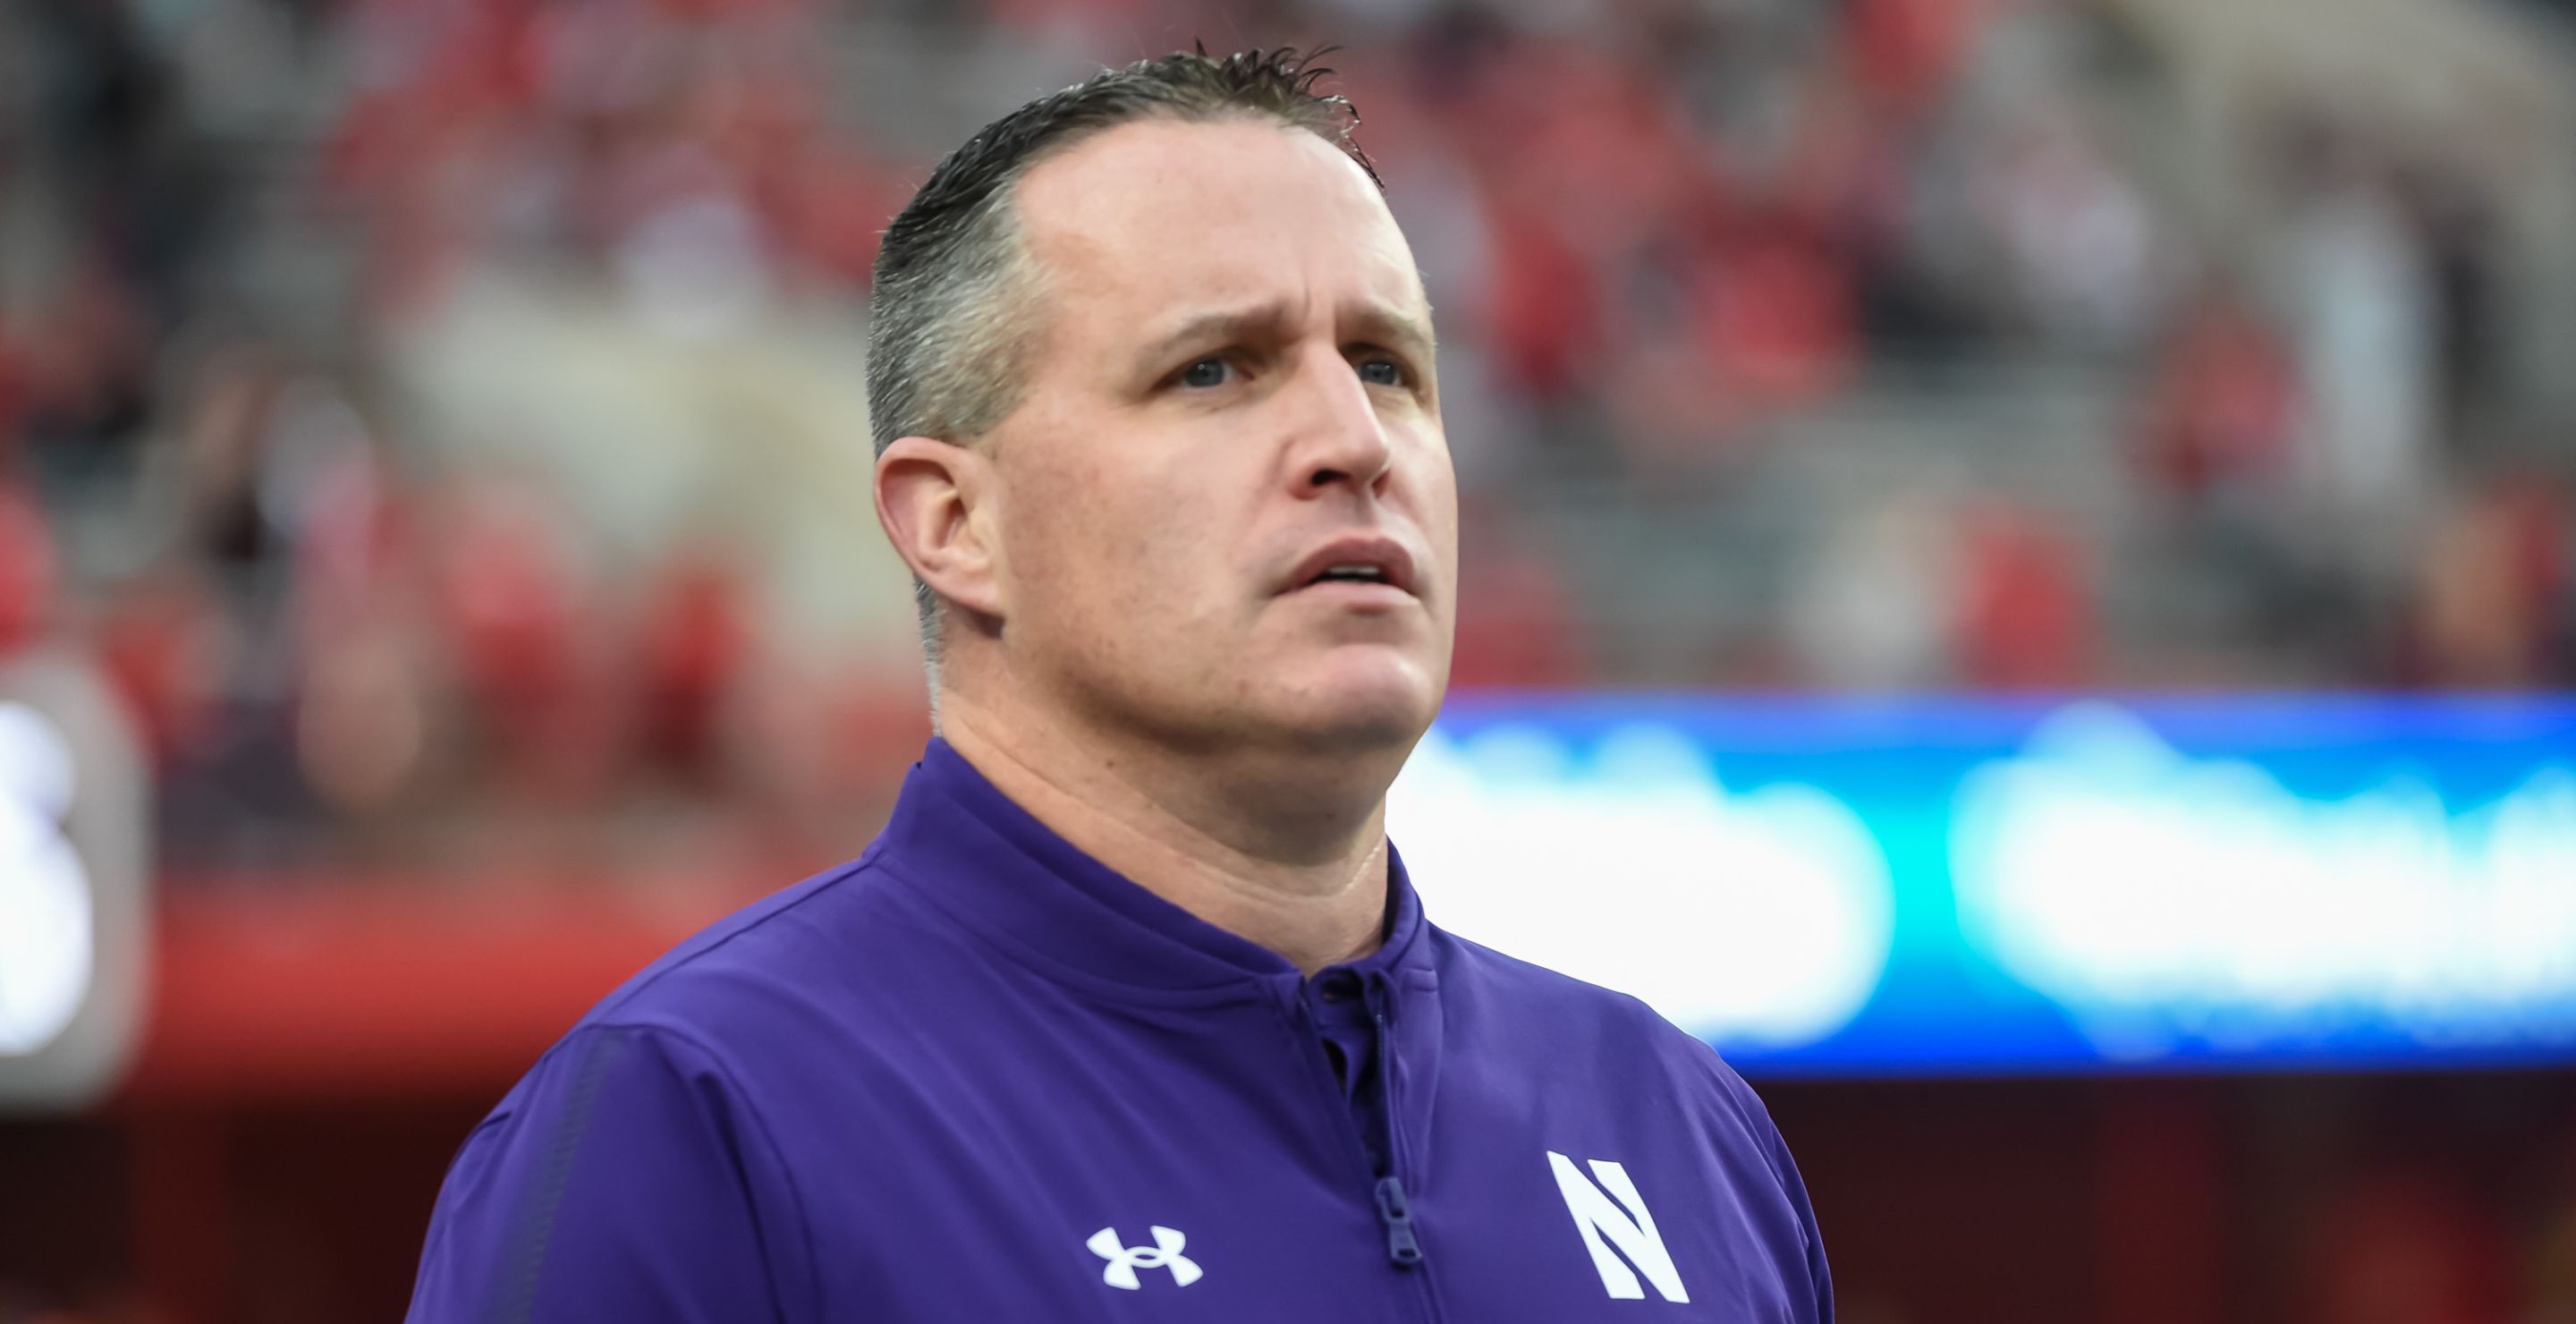 Pat Fitzgerald looks on while coaching for Northwestern.